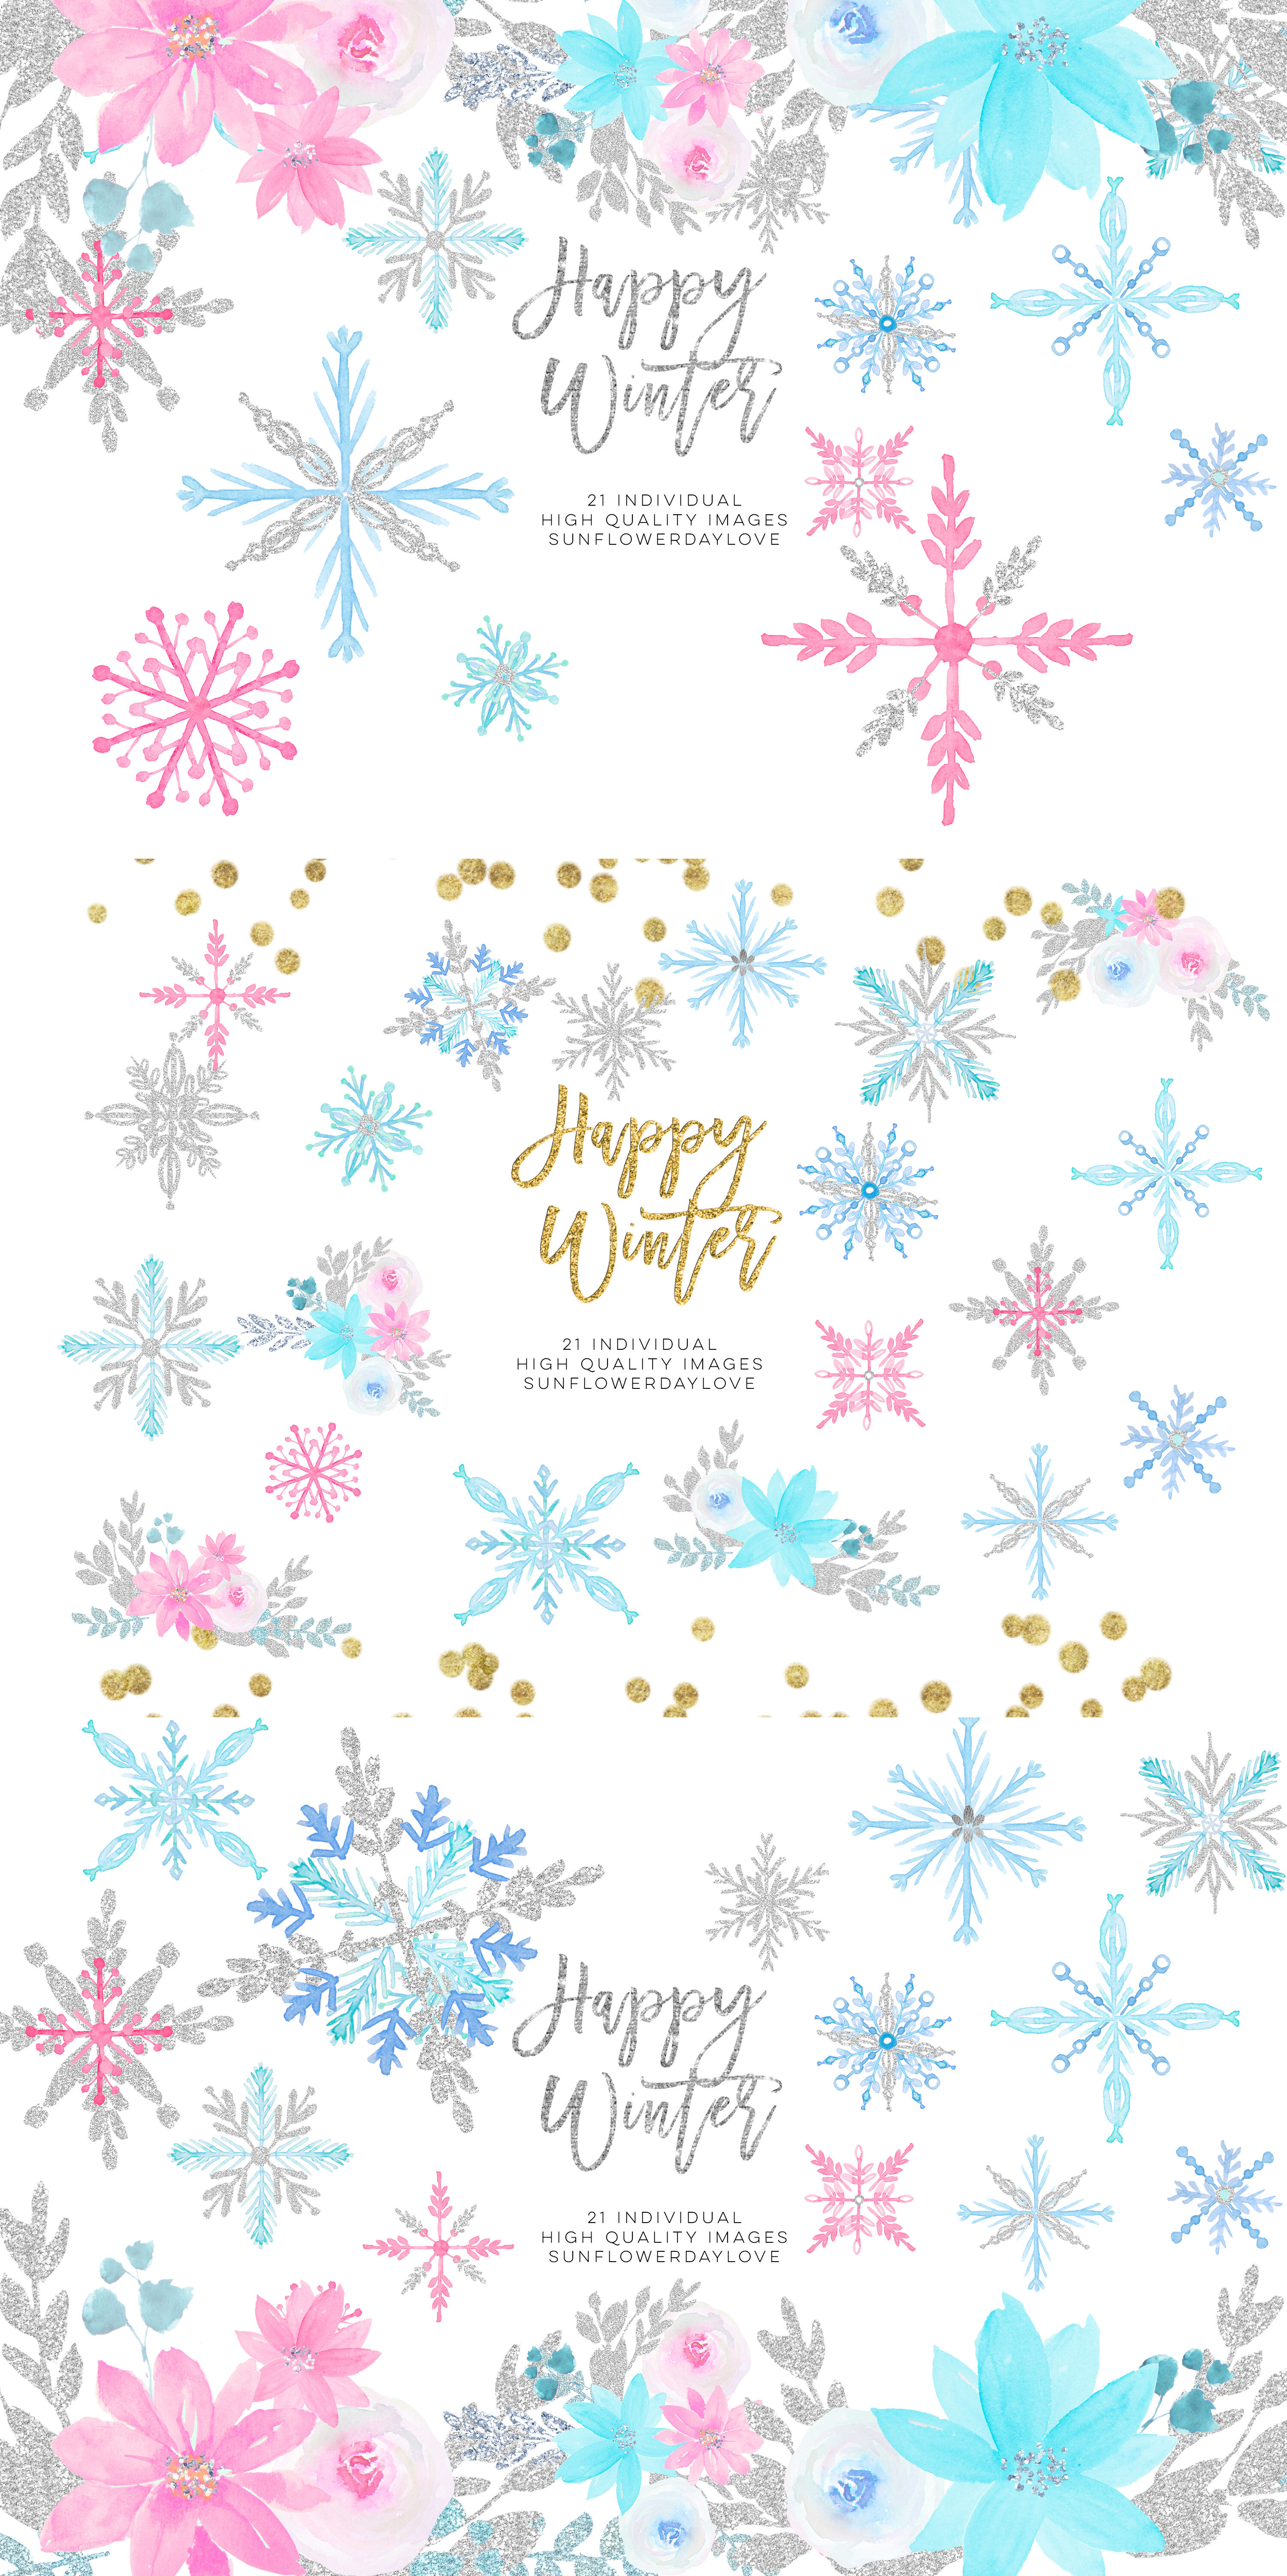 Winter onederland clipart, winter snowflakes clipart By.